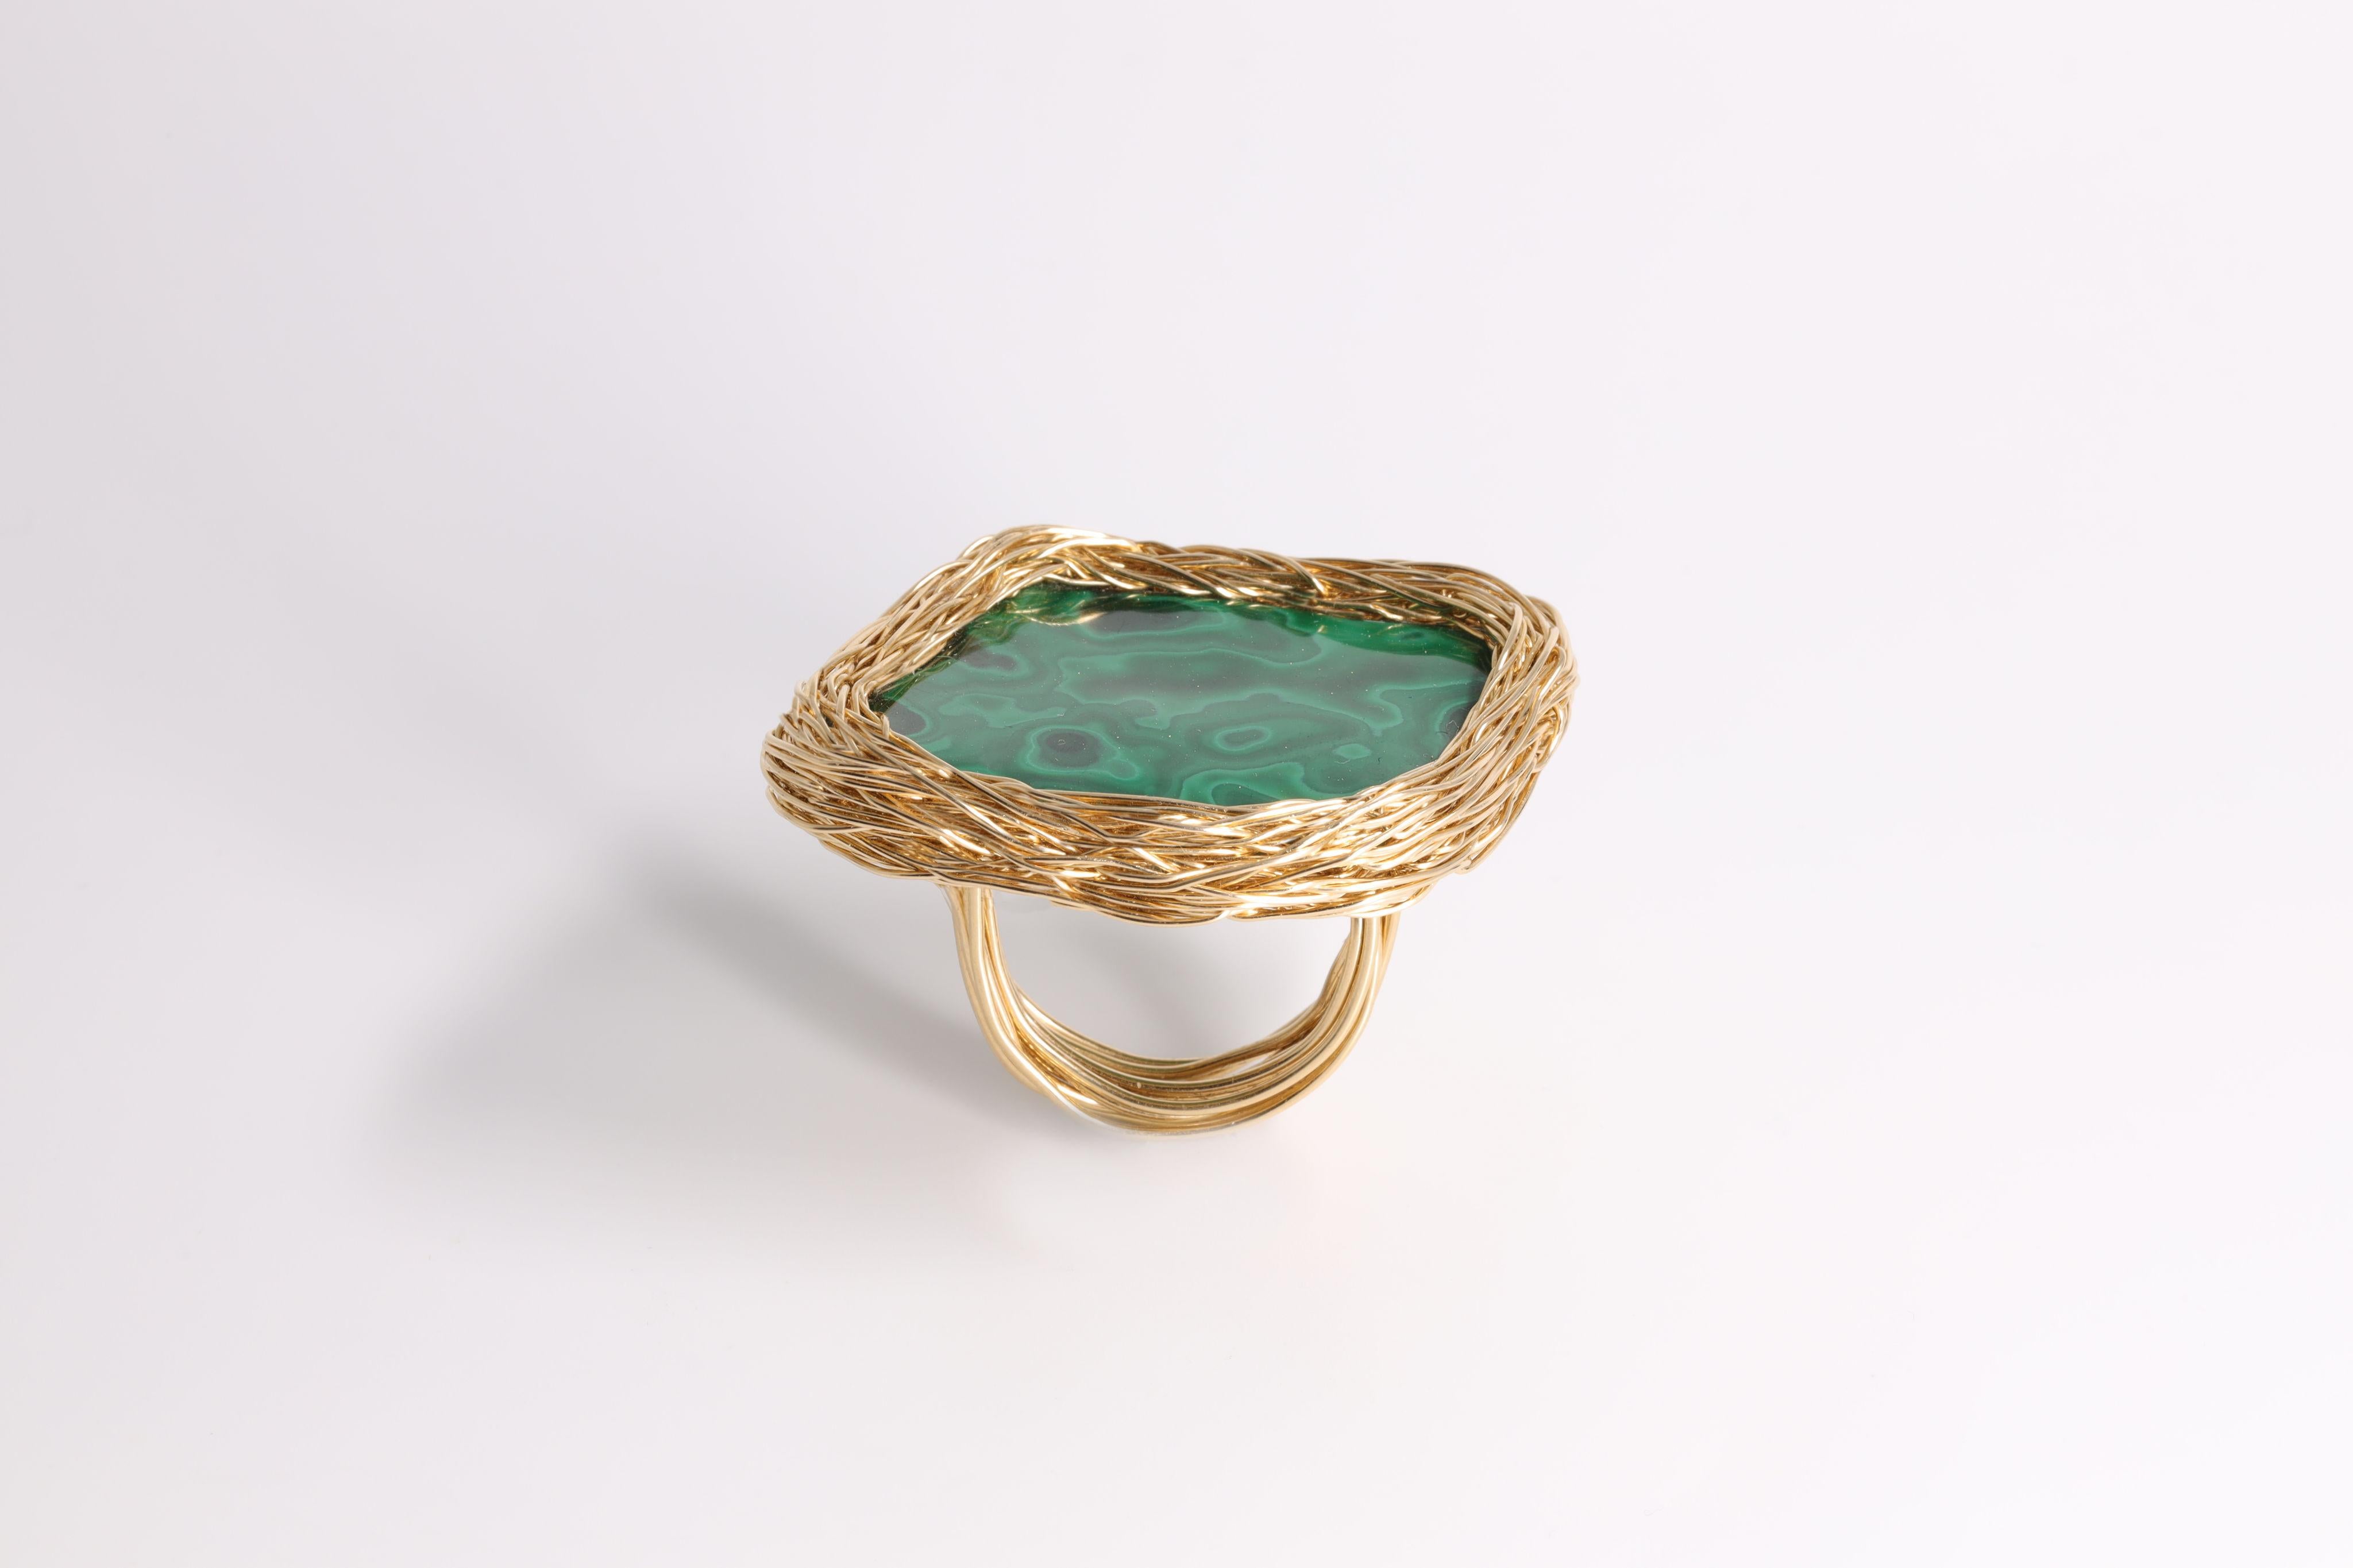 Women's or Men's Greenest Gold and Malachite Statement Cocktail Ring by Sheila Westera London